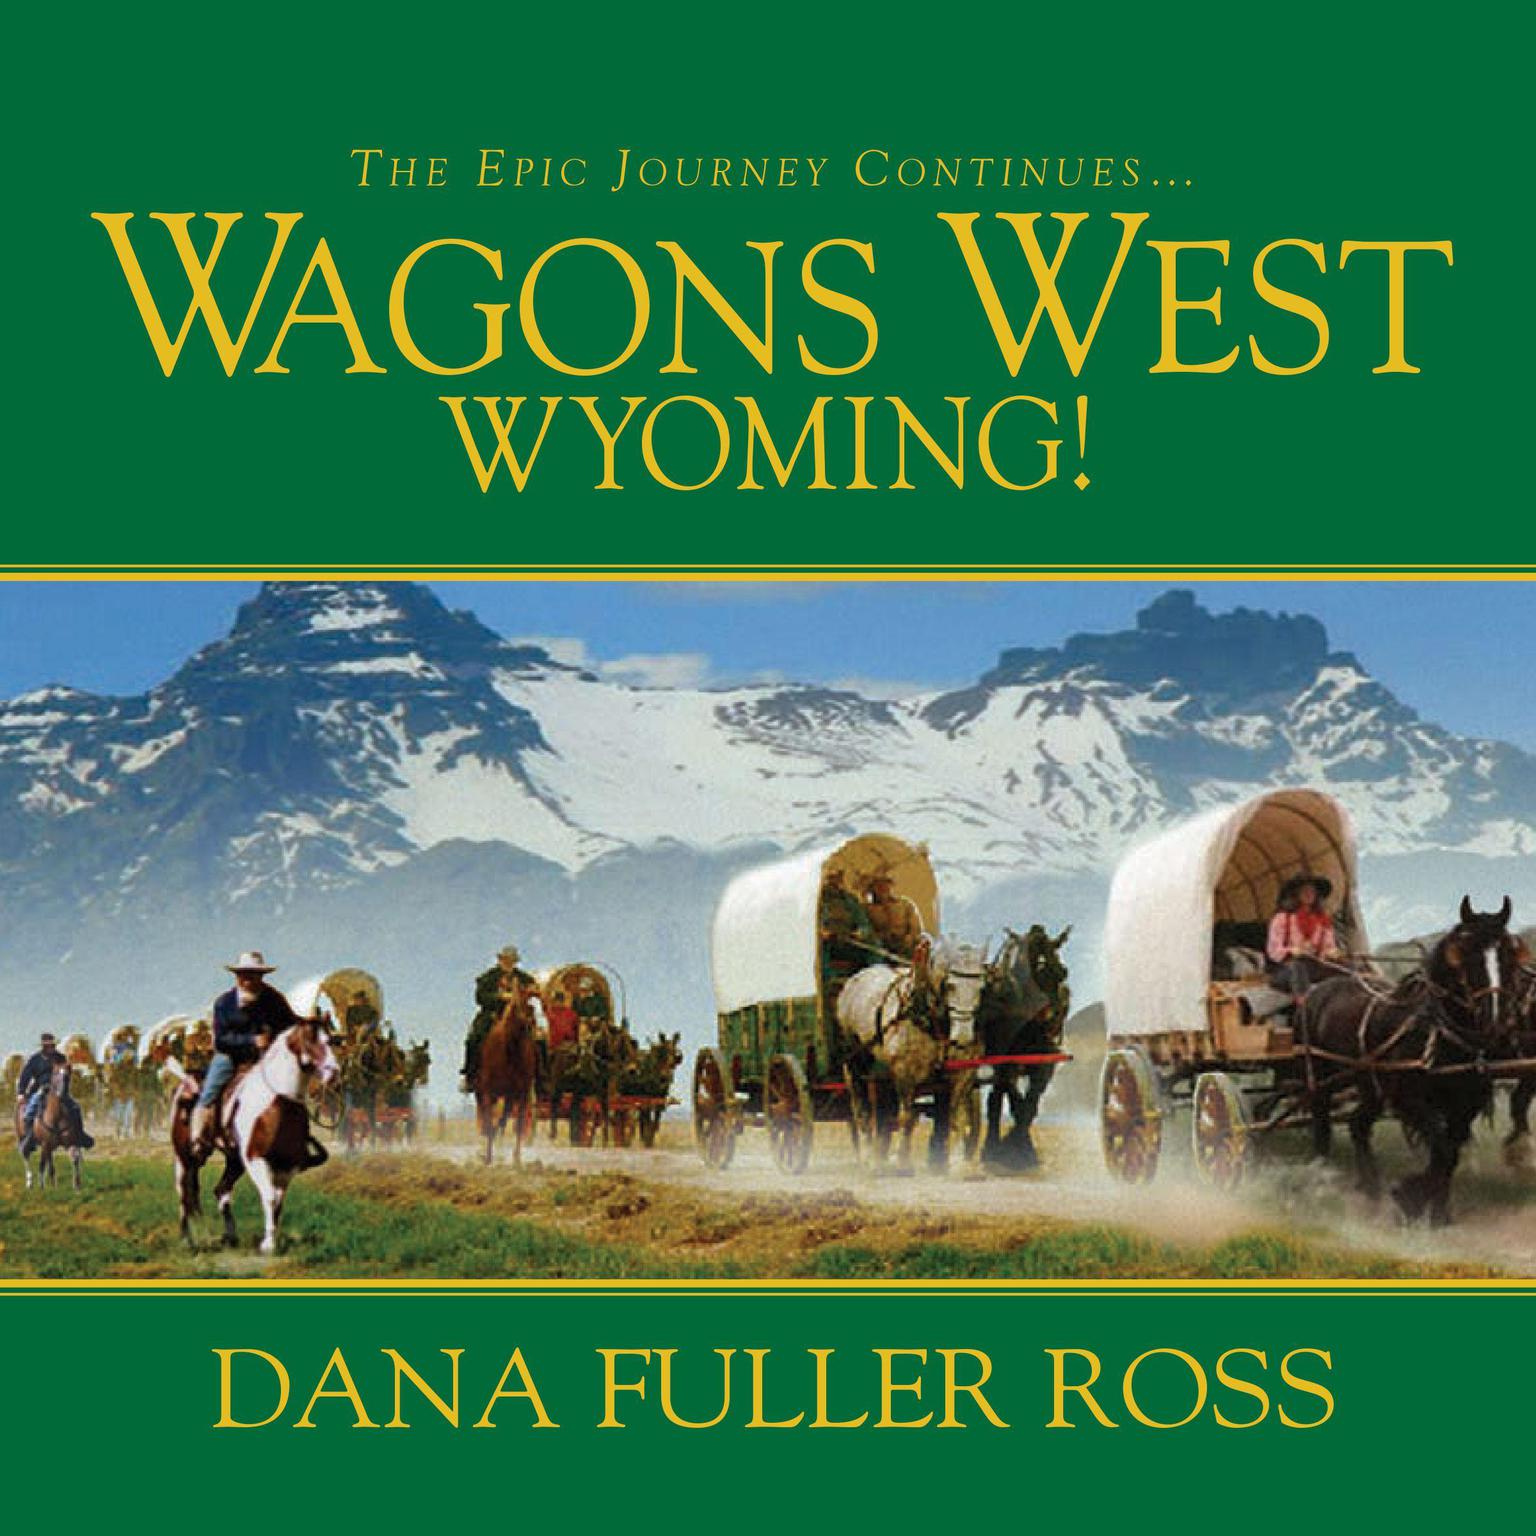 Wagons West Wyoming! (Abridged) Audiobook, by Dana Fuller Ross